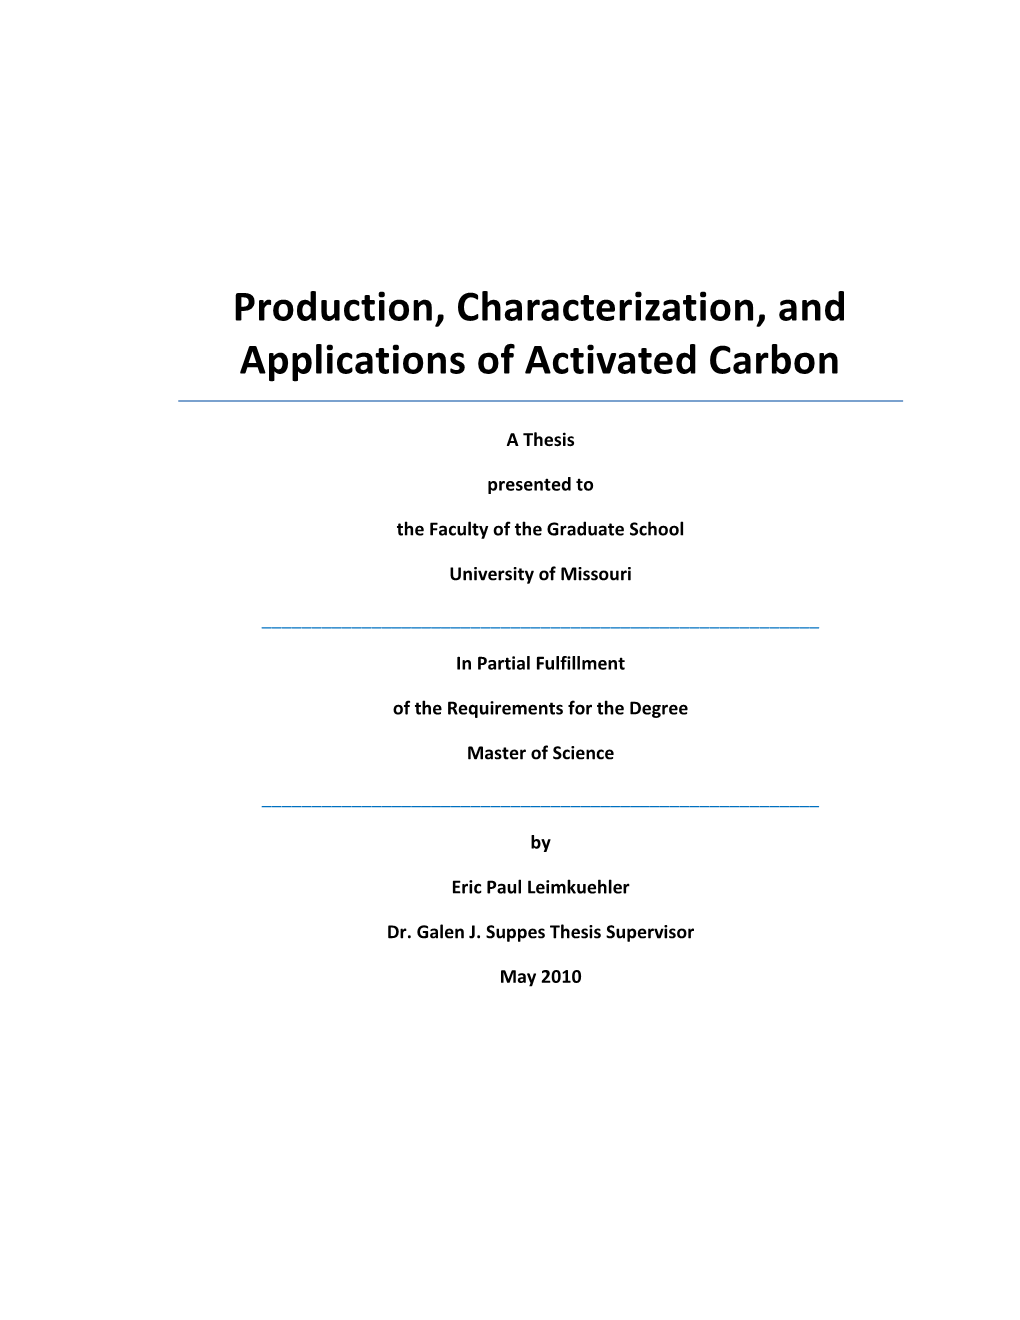 Production, Characterization, and Applications of Activated Carbon